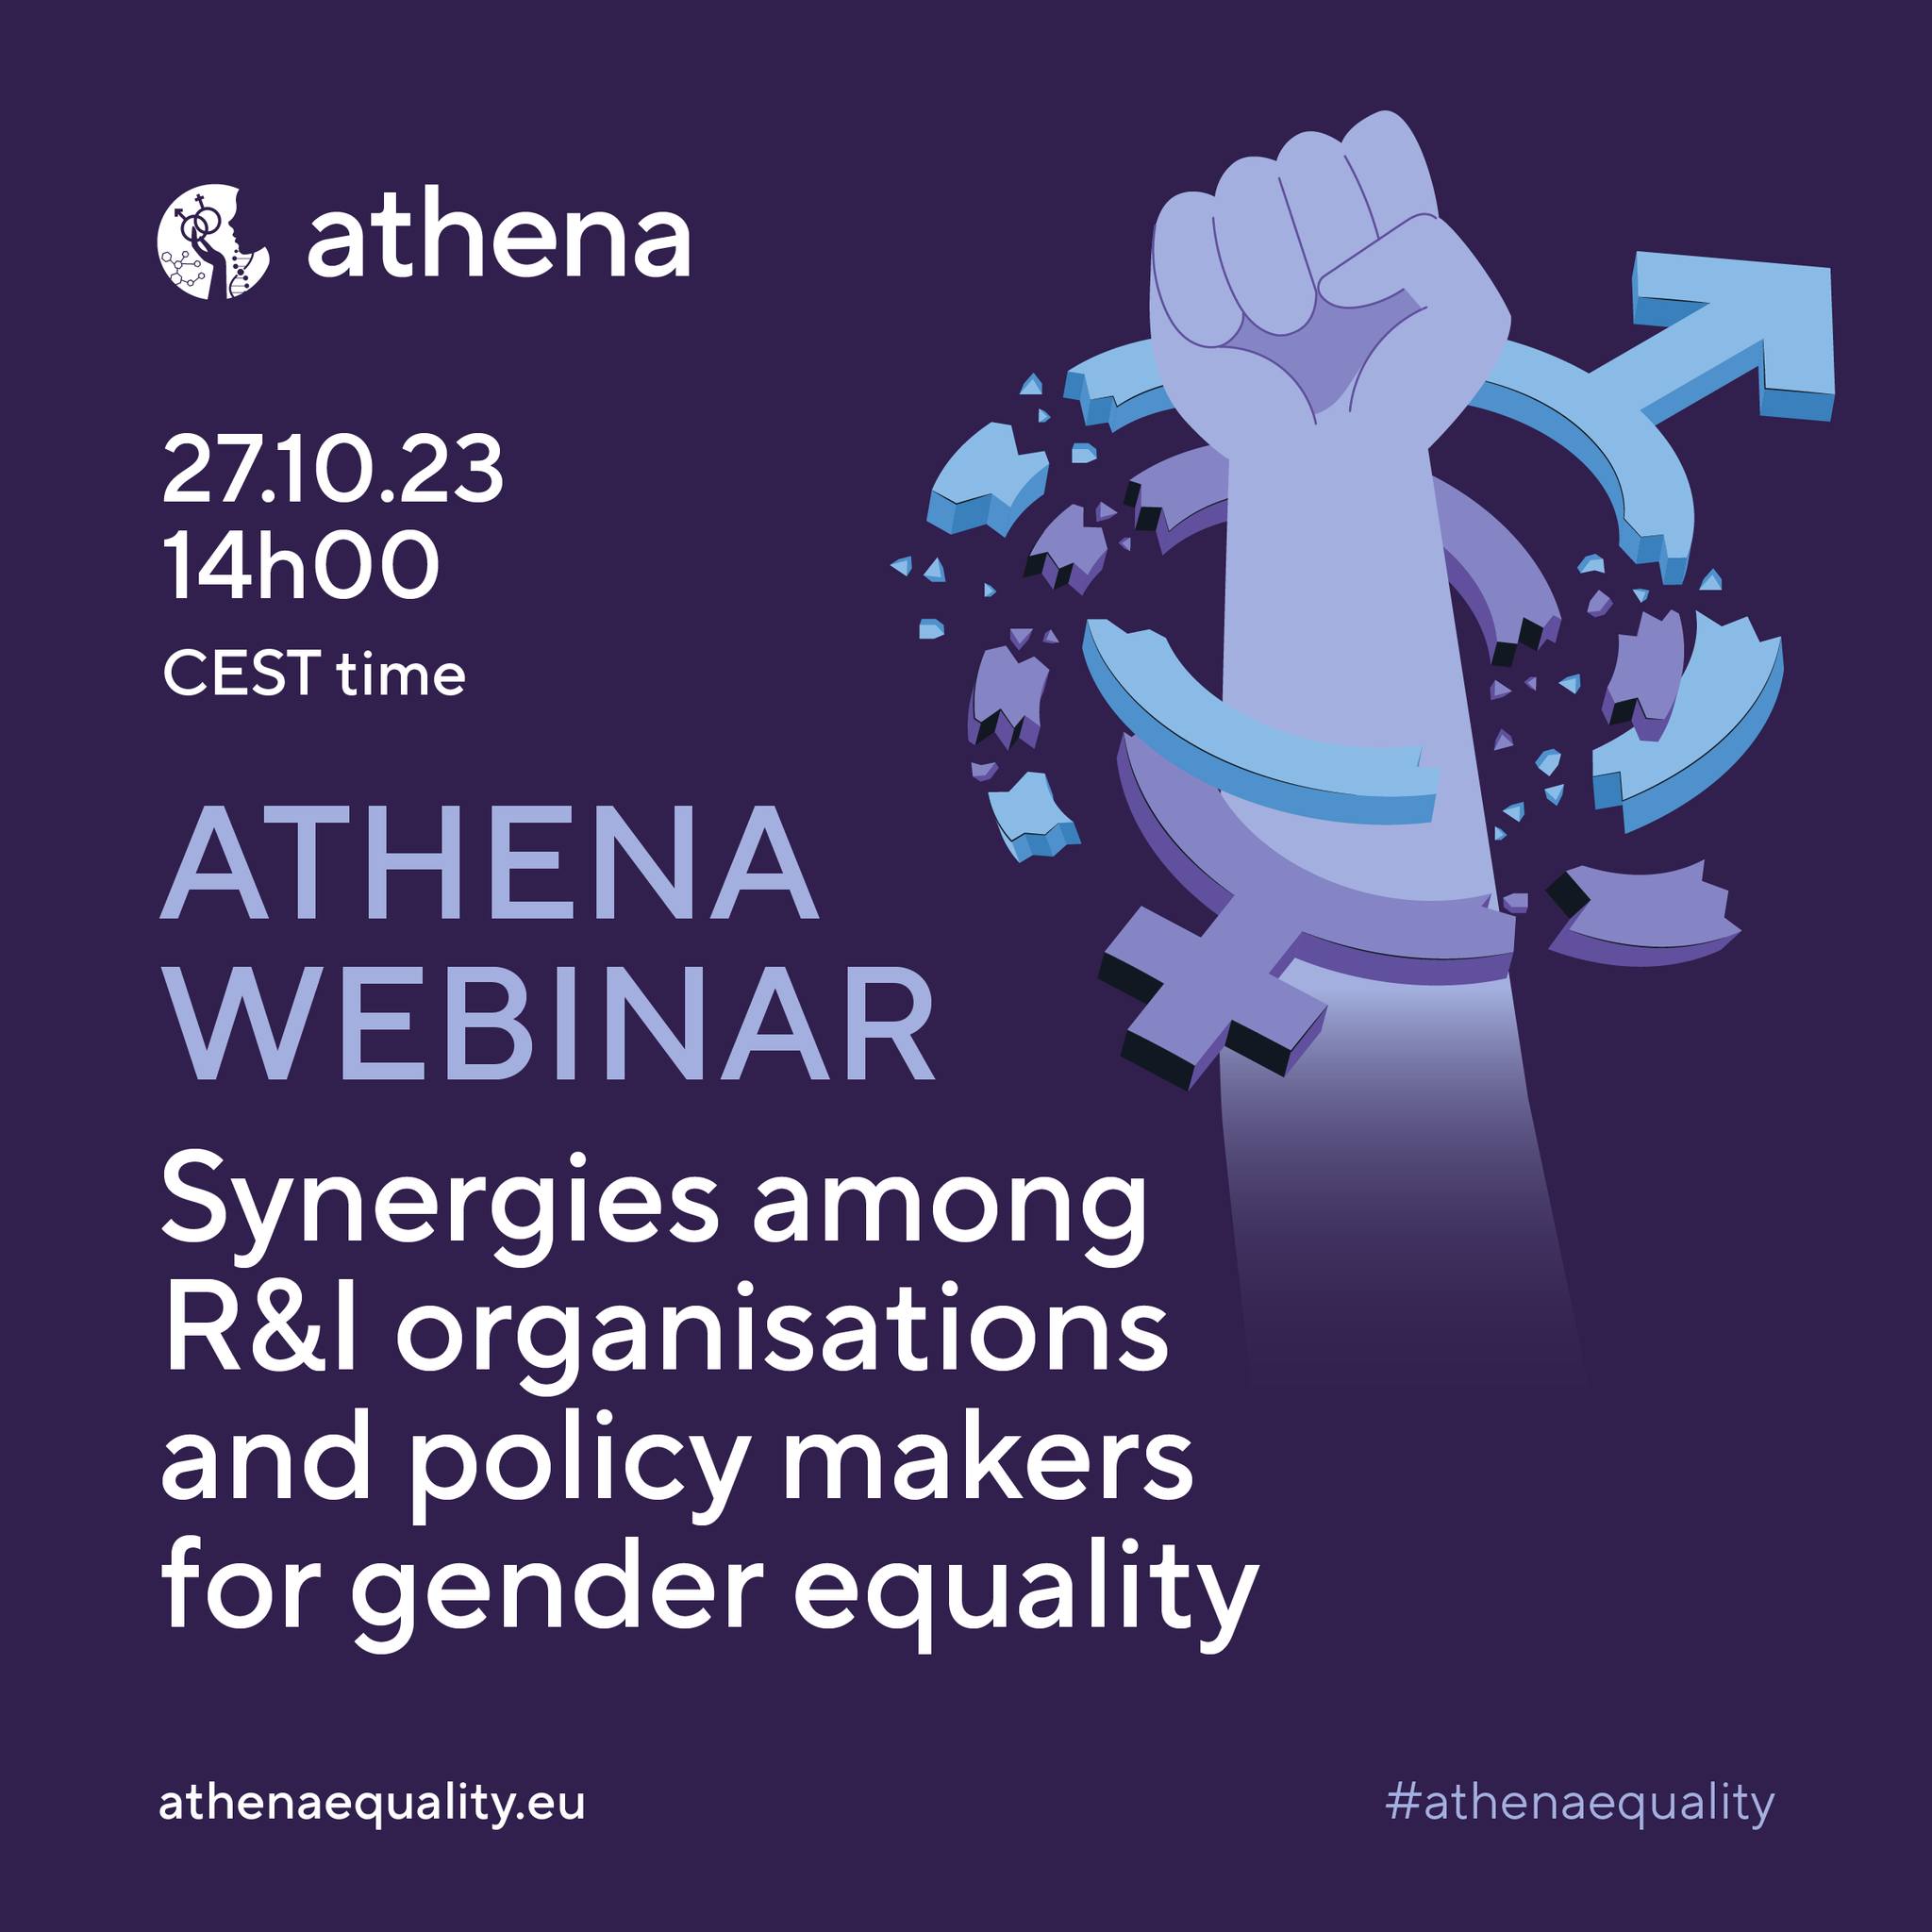 ATHENA WEBINAR “Synergies among R&I organisations and policy makers for gender equality”